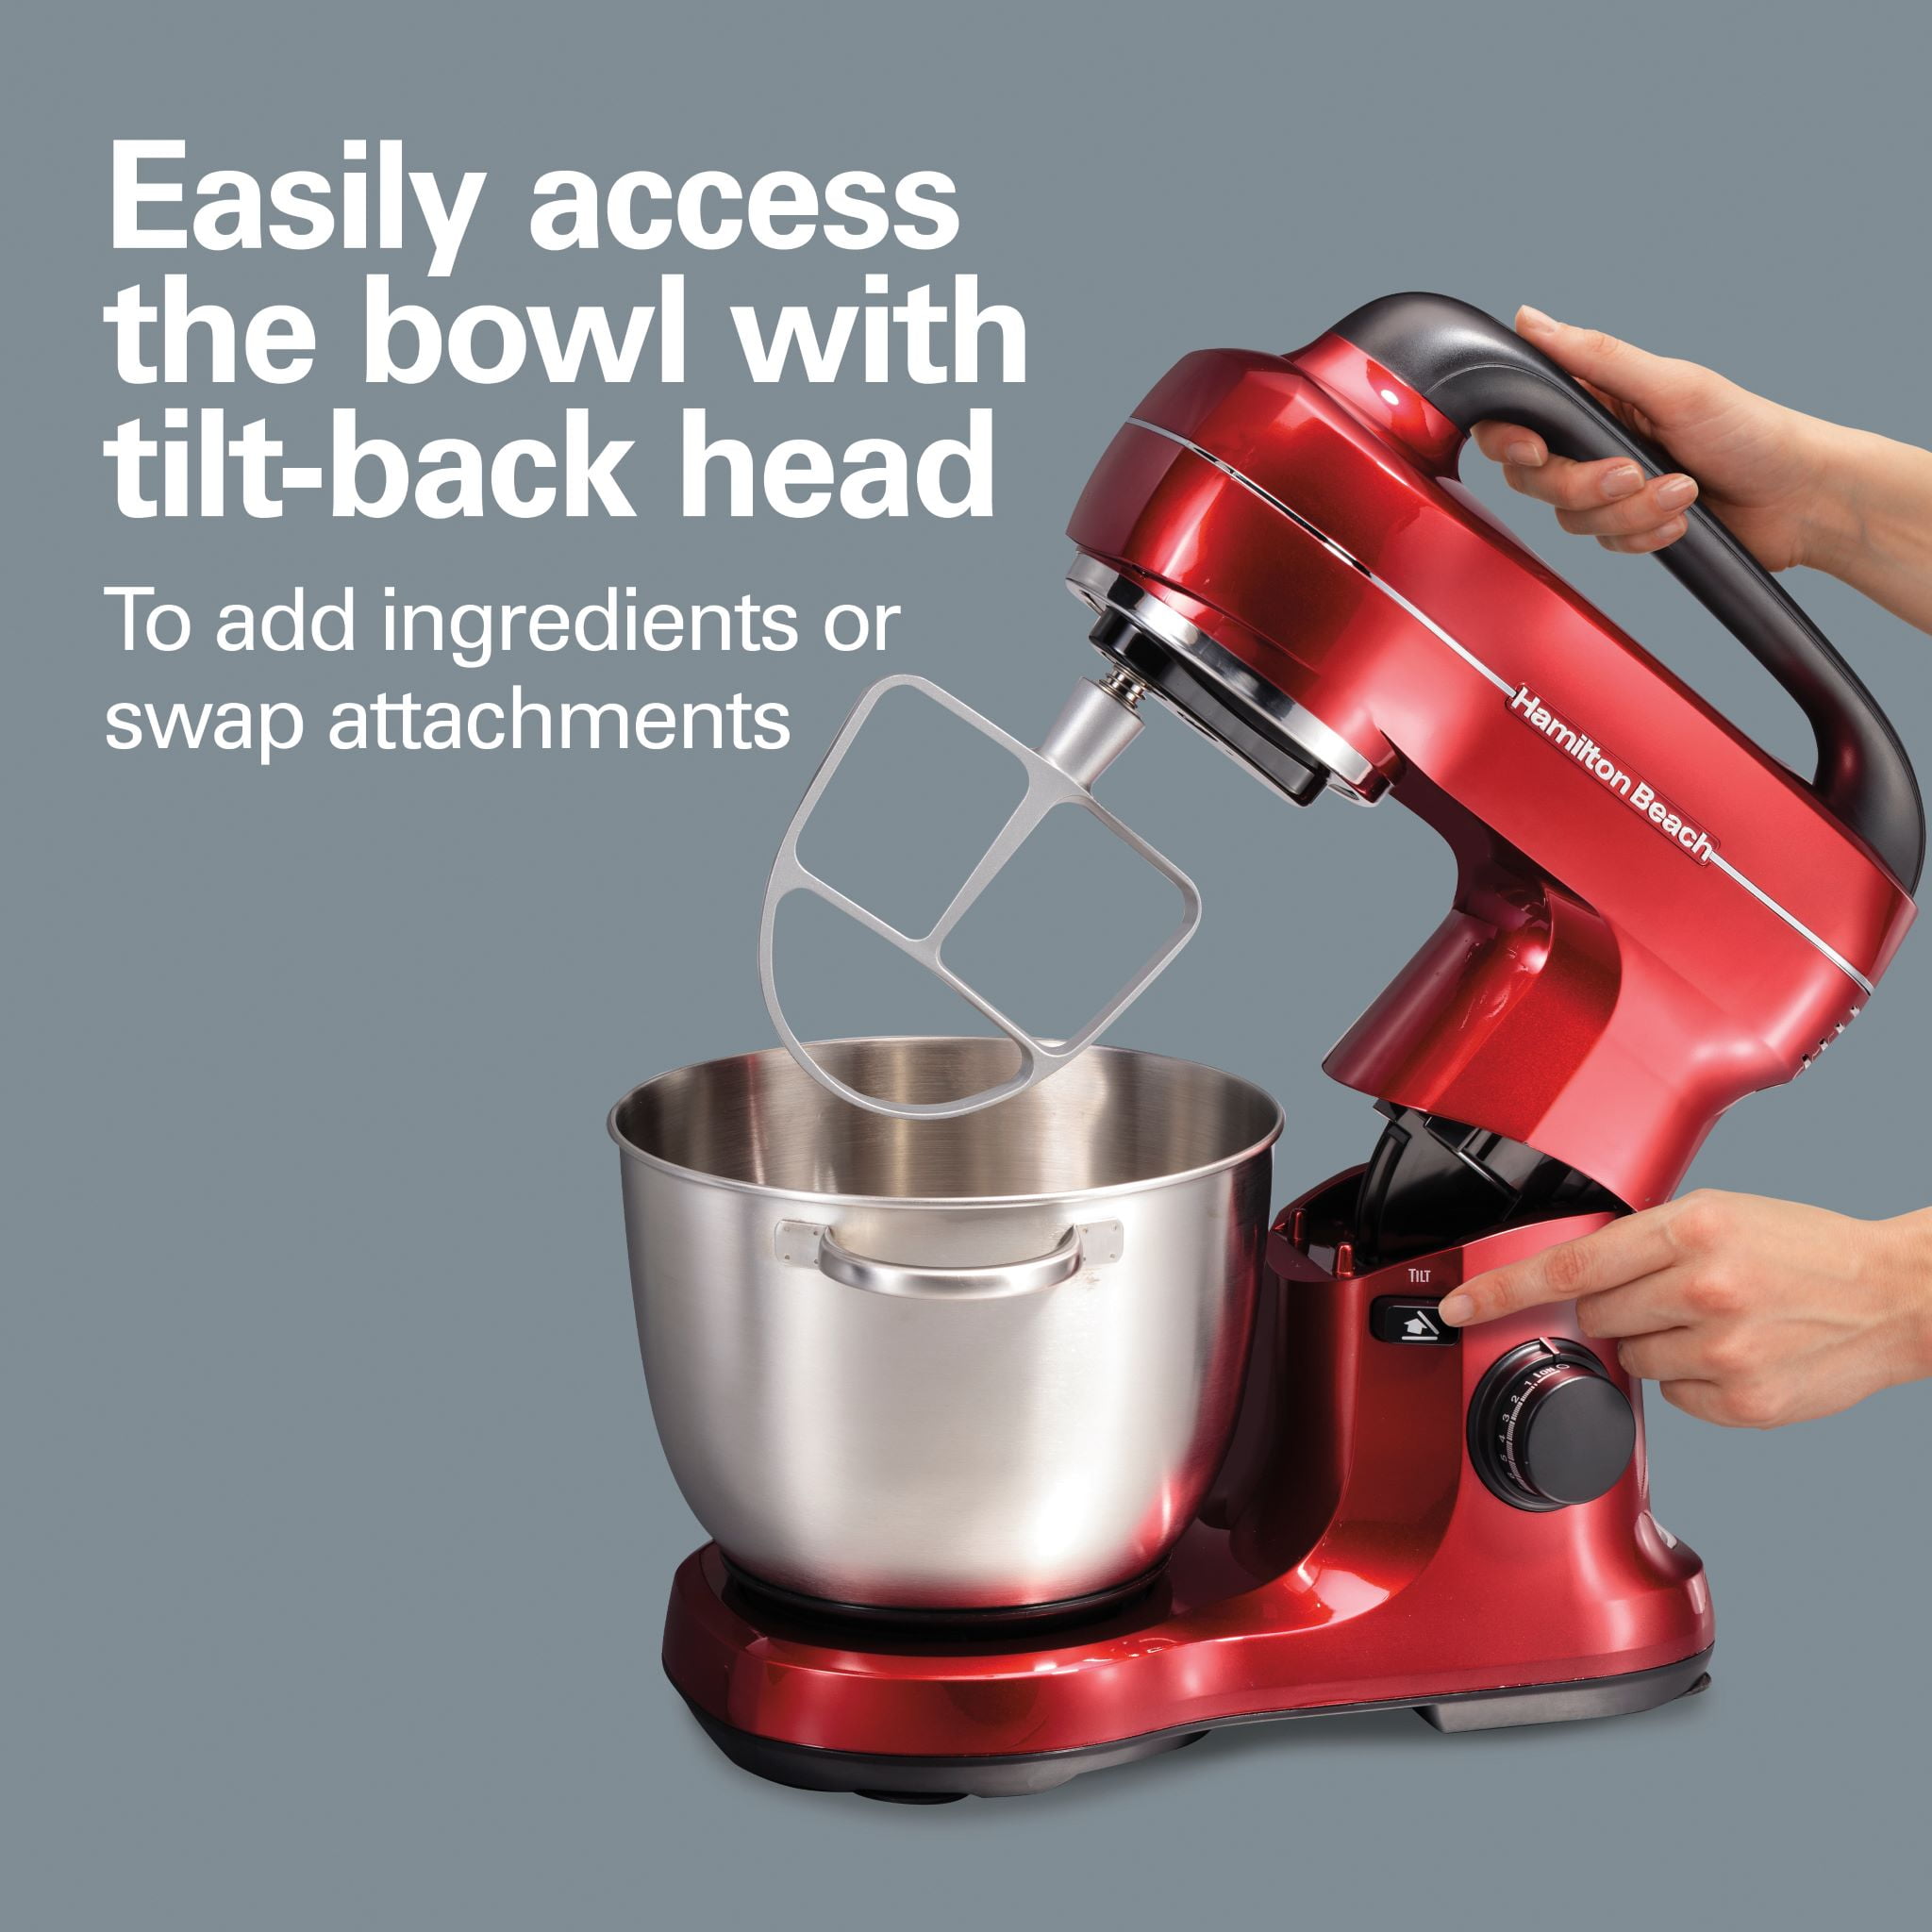 Hamilton Beach Red 7 Speed Stand Mixer - Shop Blenders & Mixers at H-E-B